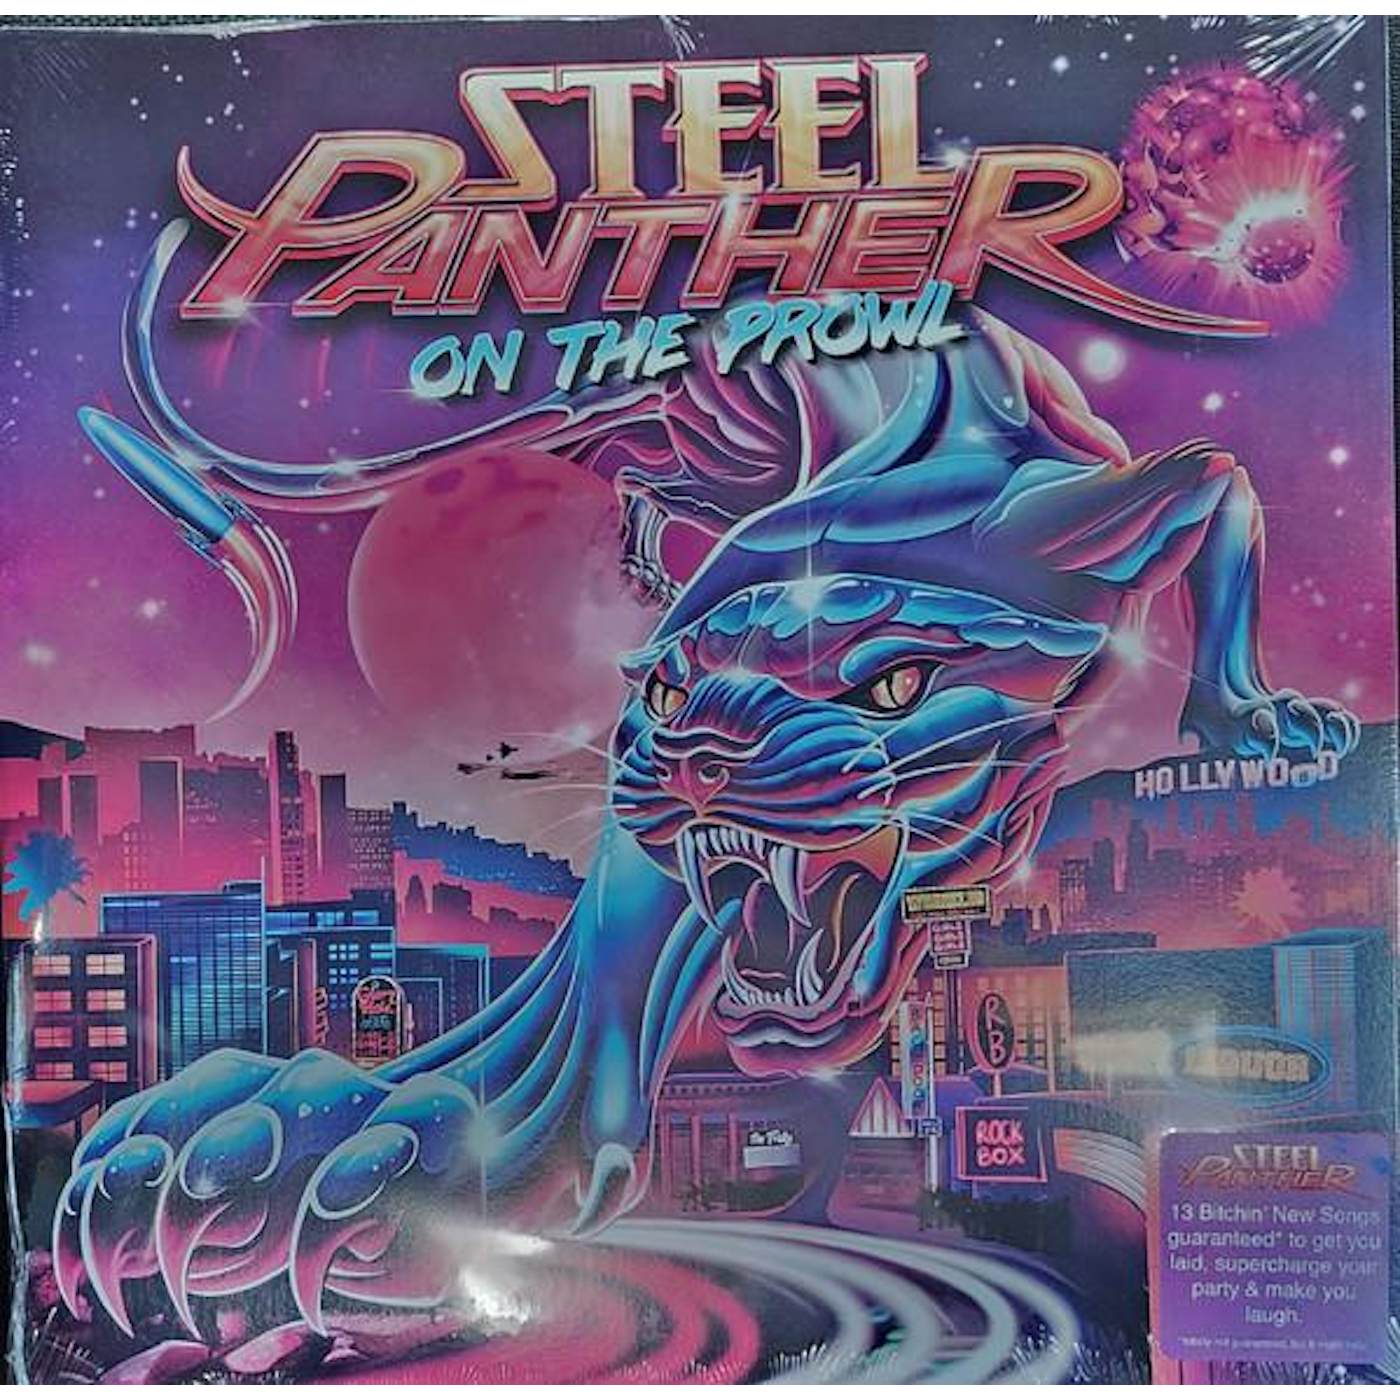 Steel Panther On the Prowl Vinyl Record